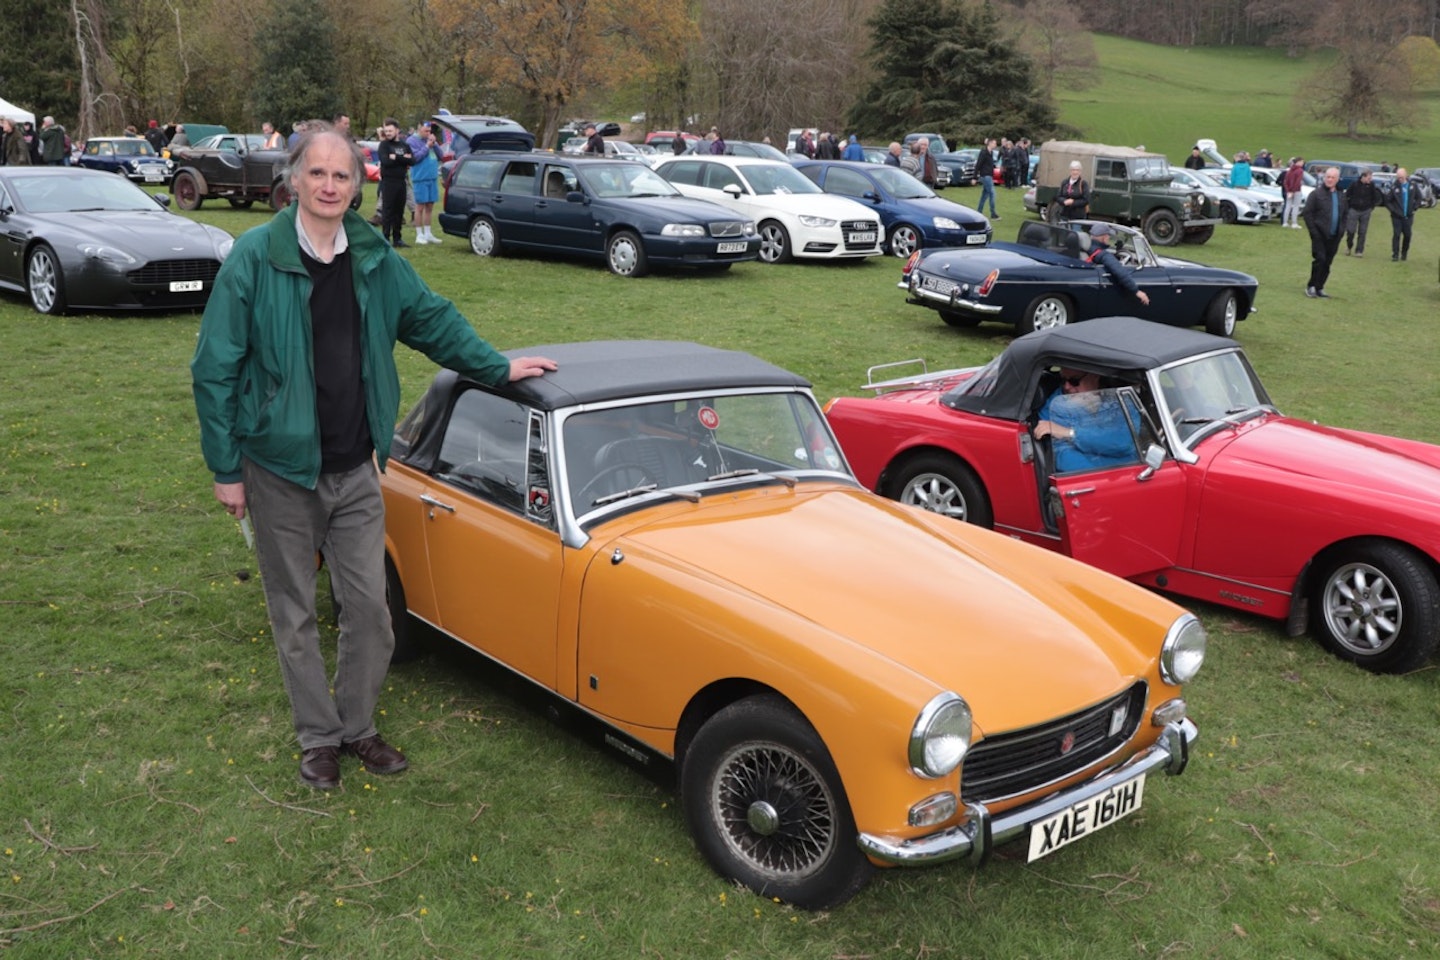 This 1970 MG Midget has been in Tom Hall’s family for more than 50 years.